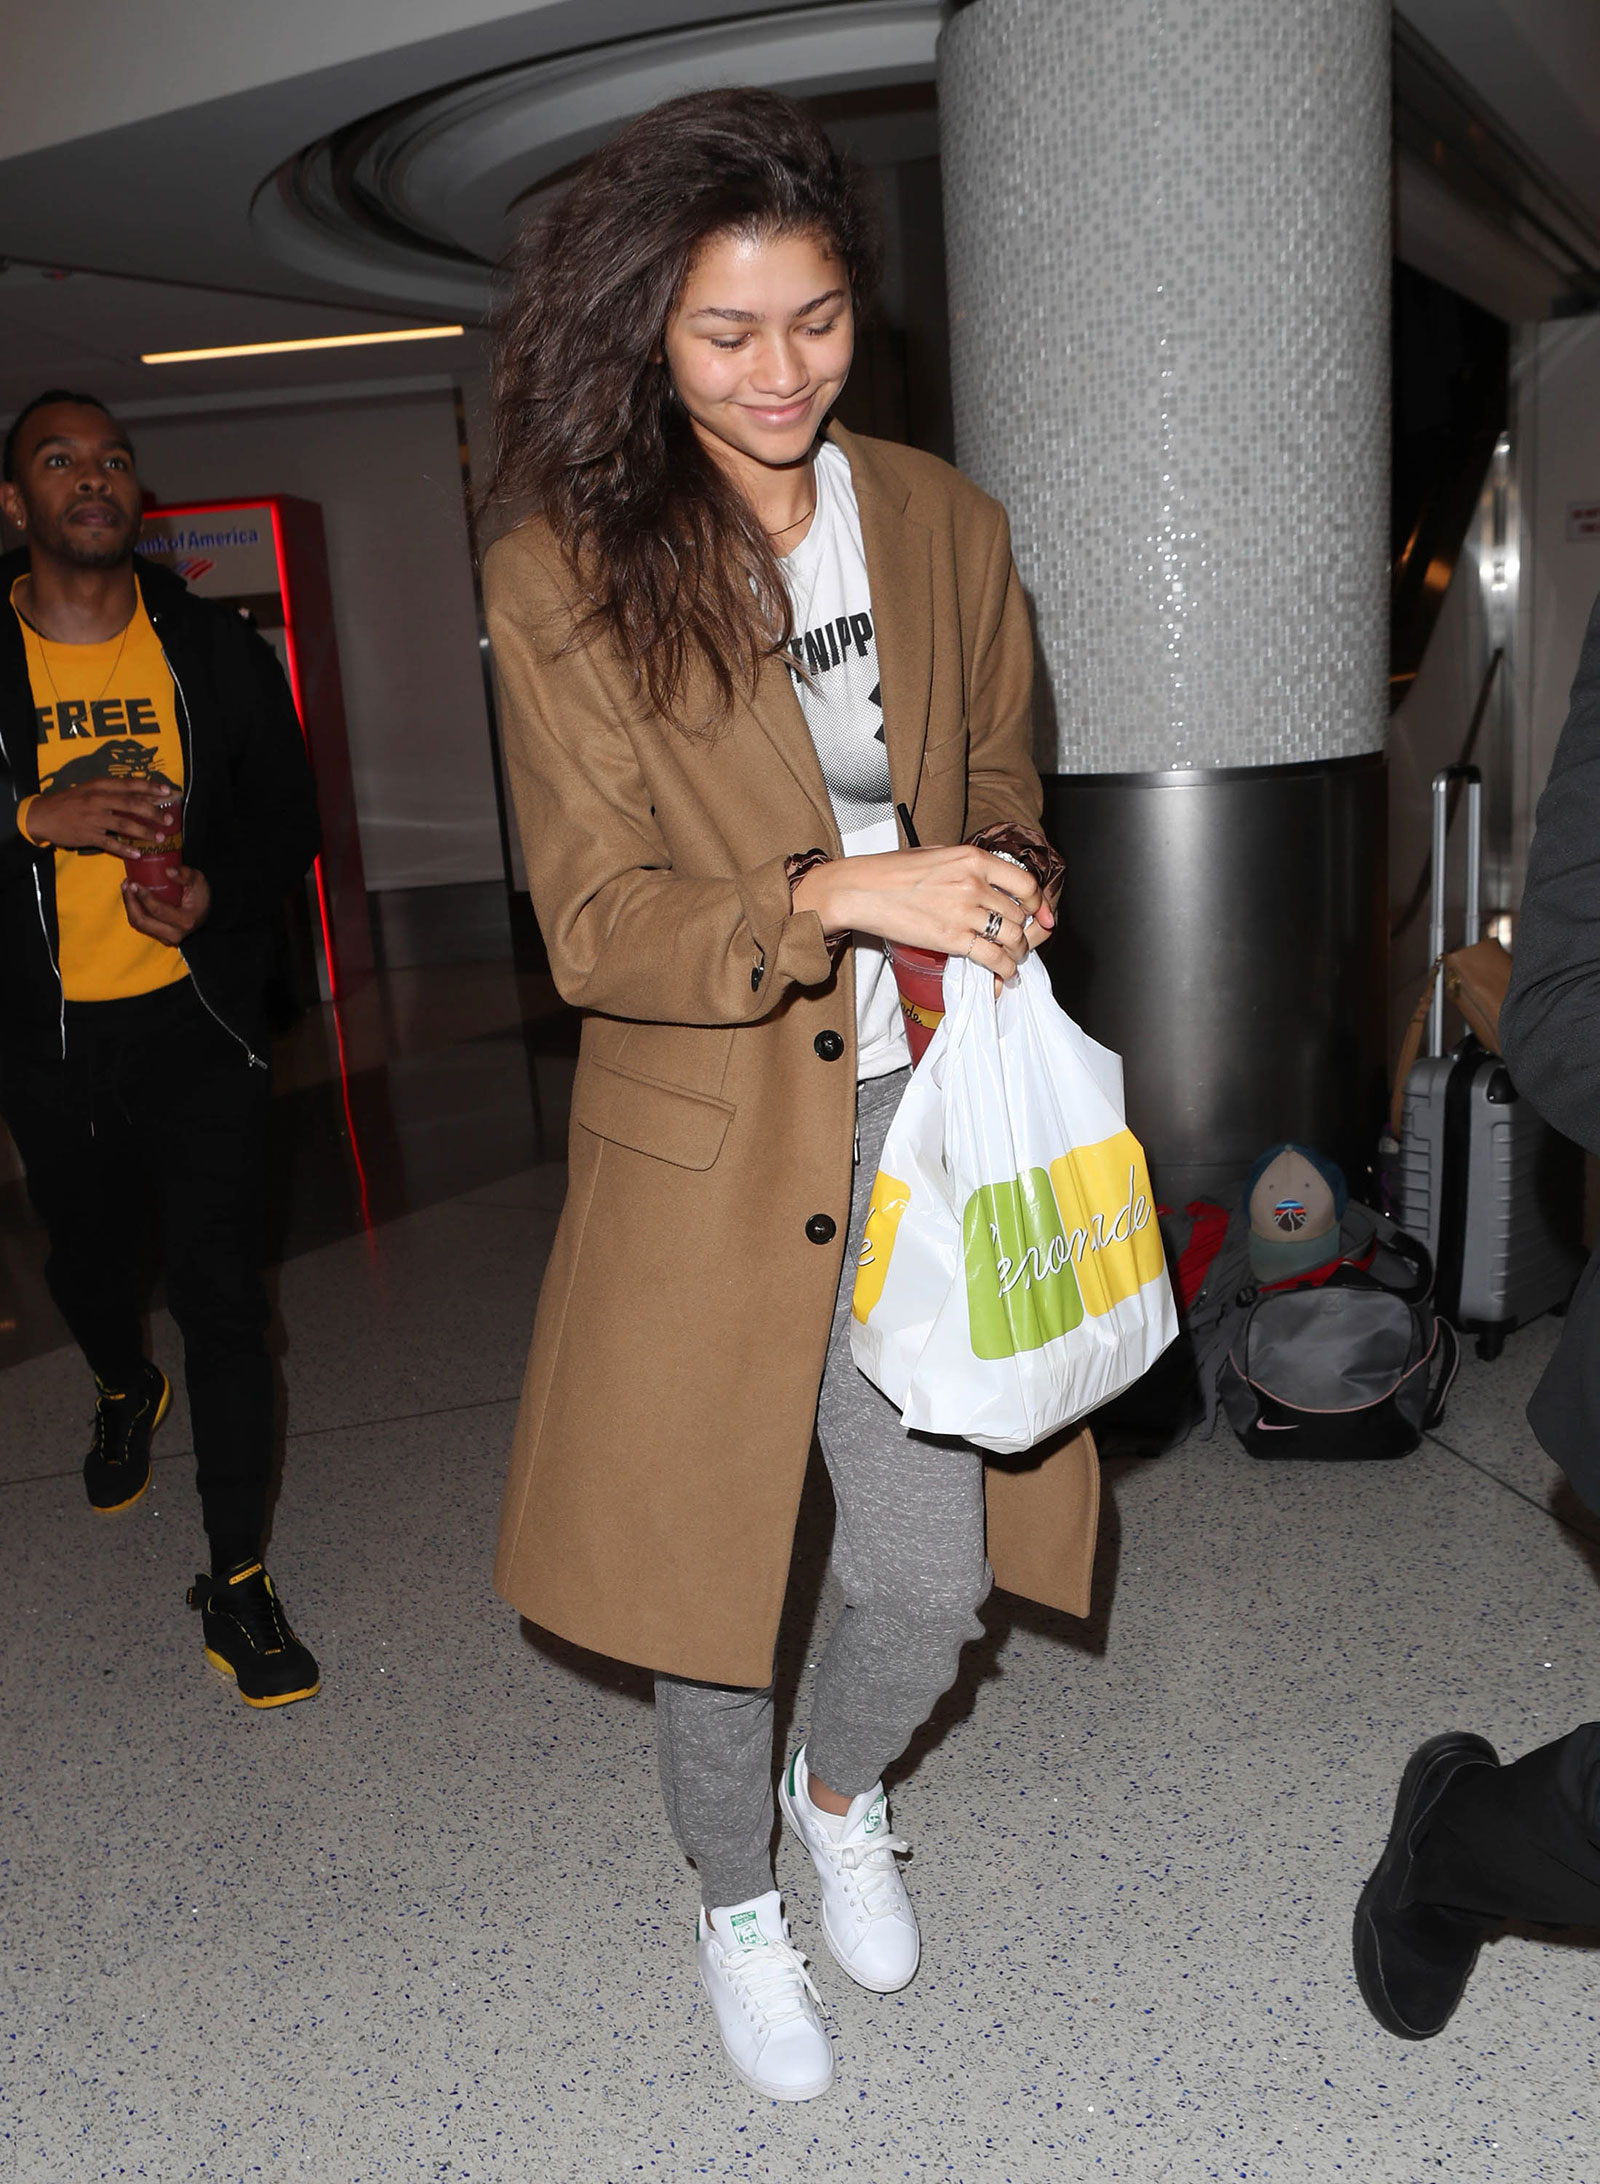 Zendaya wears a camel coat with a Free the Nipple t-shirt, gray joggers and Stan Smith sneakers.